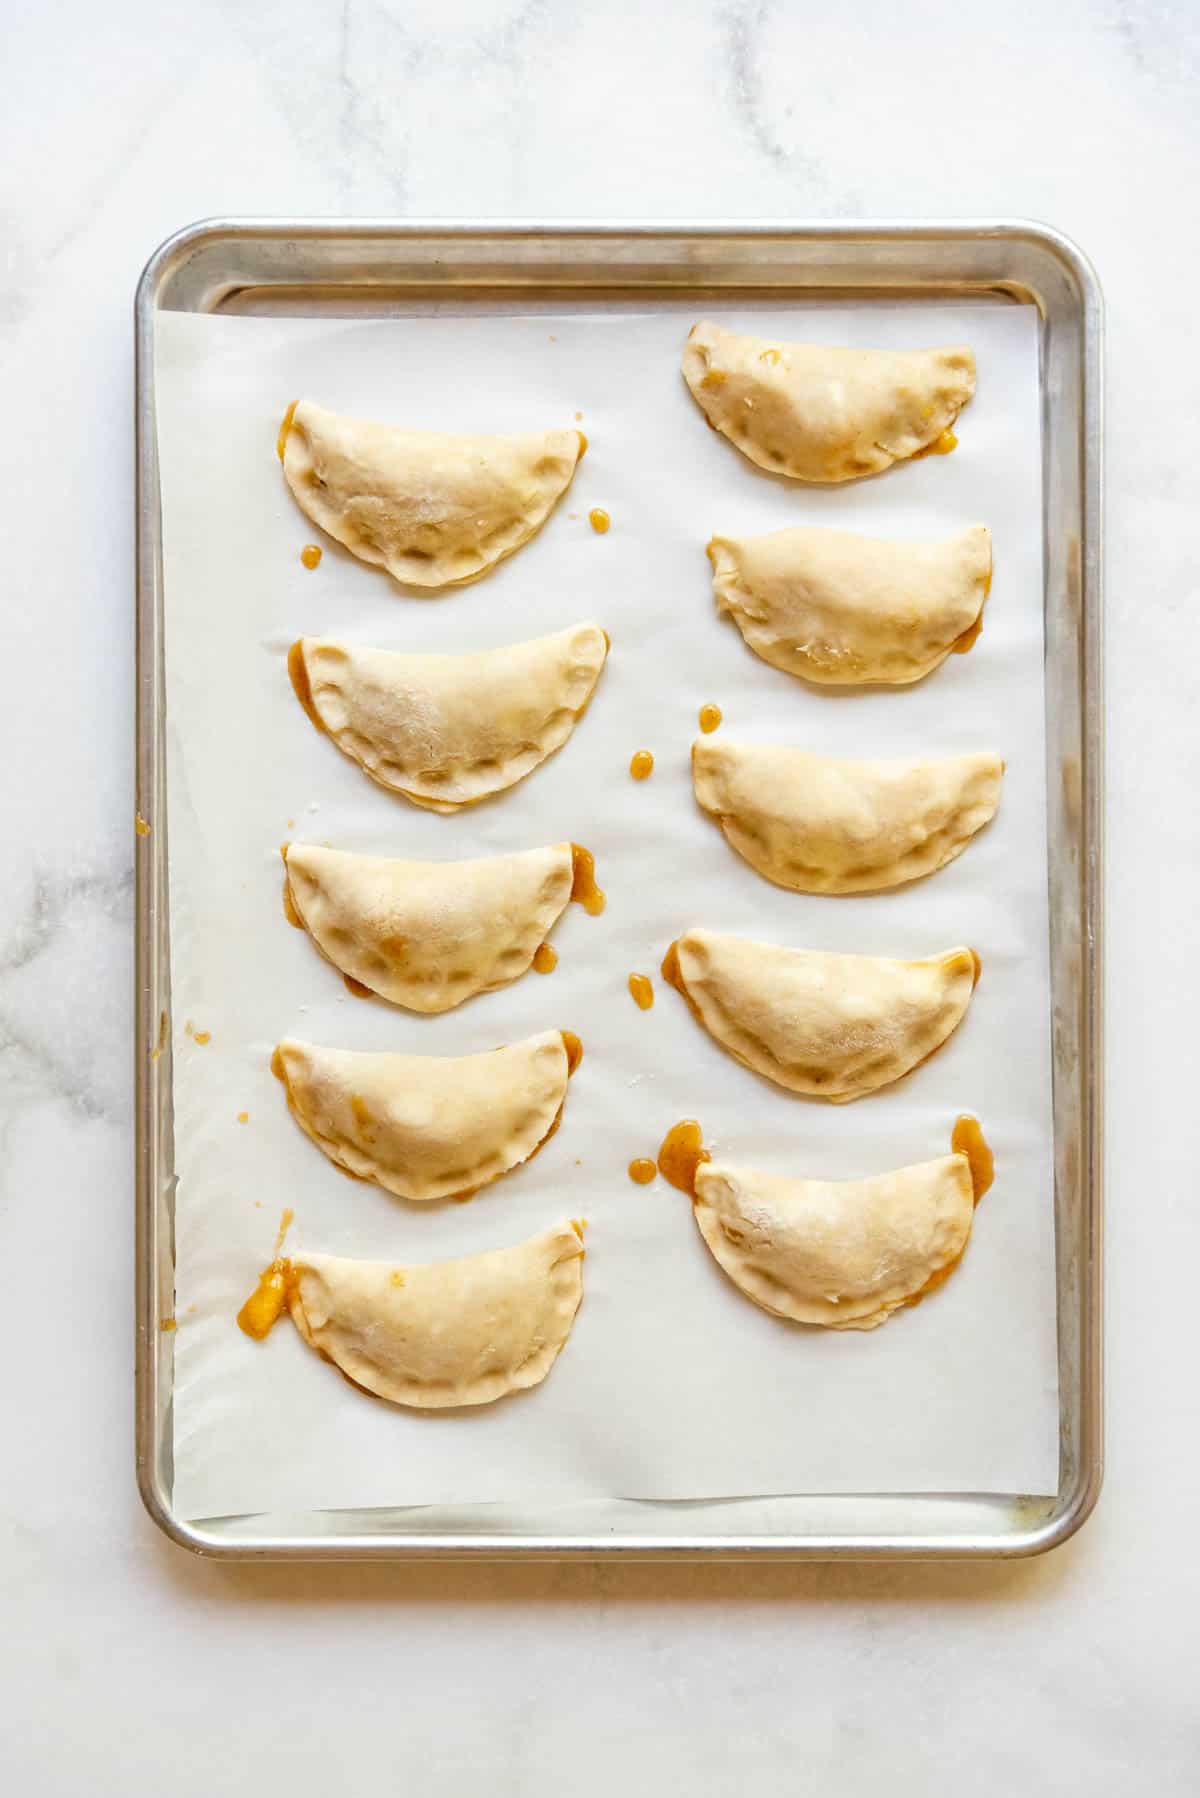 Sealed peach hand pies before baking on a baking sheet lined with parchment paper.